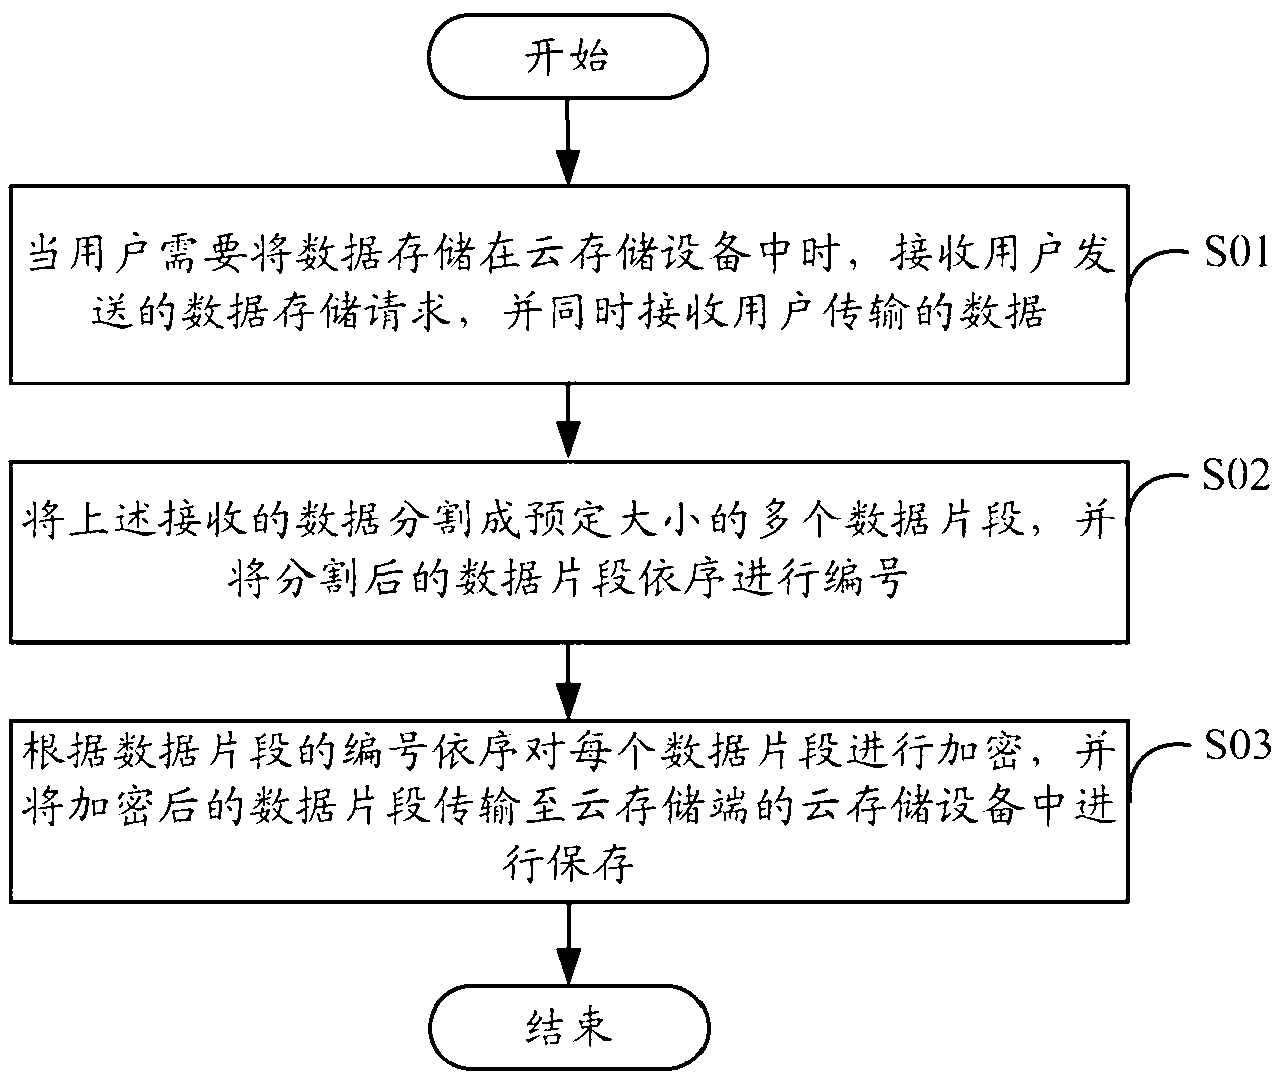 Cloud storage-based data security protection system and method